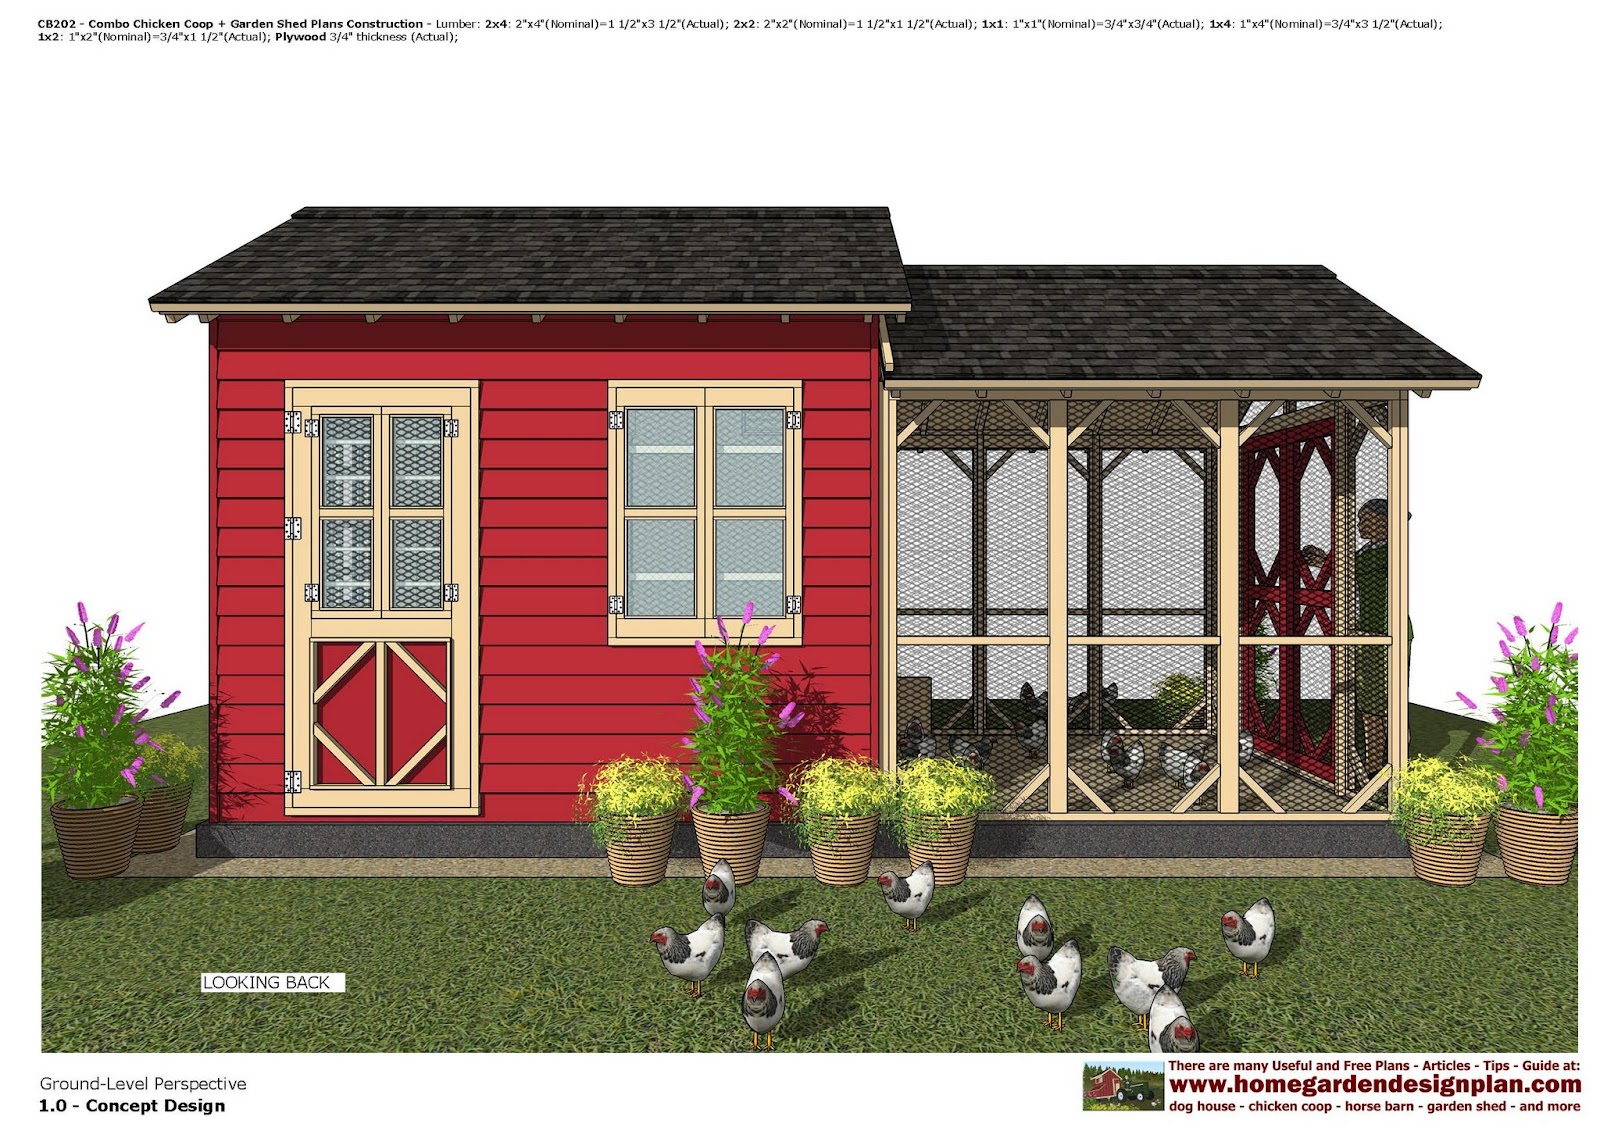 home garden plans: CB202 _ Combo Chicken Coop + Garden Shed Plans 